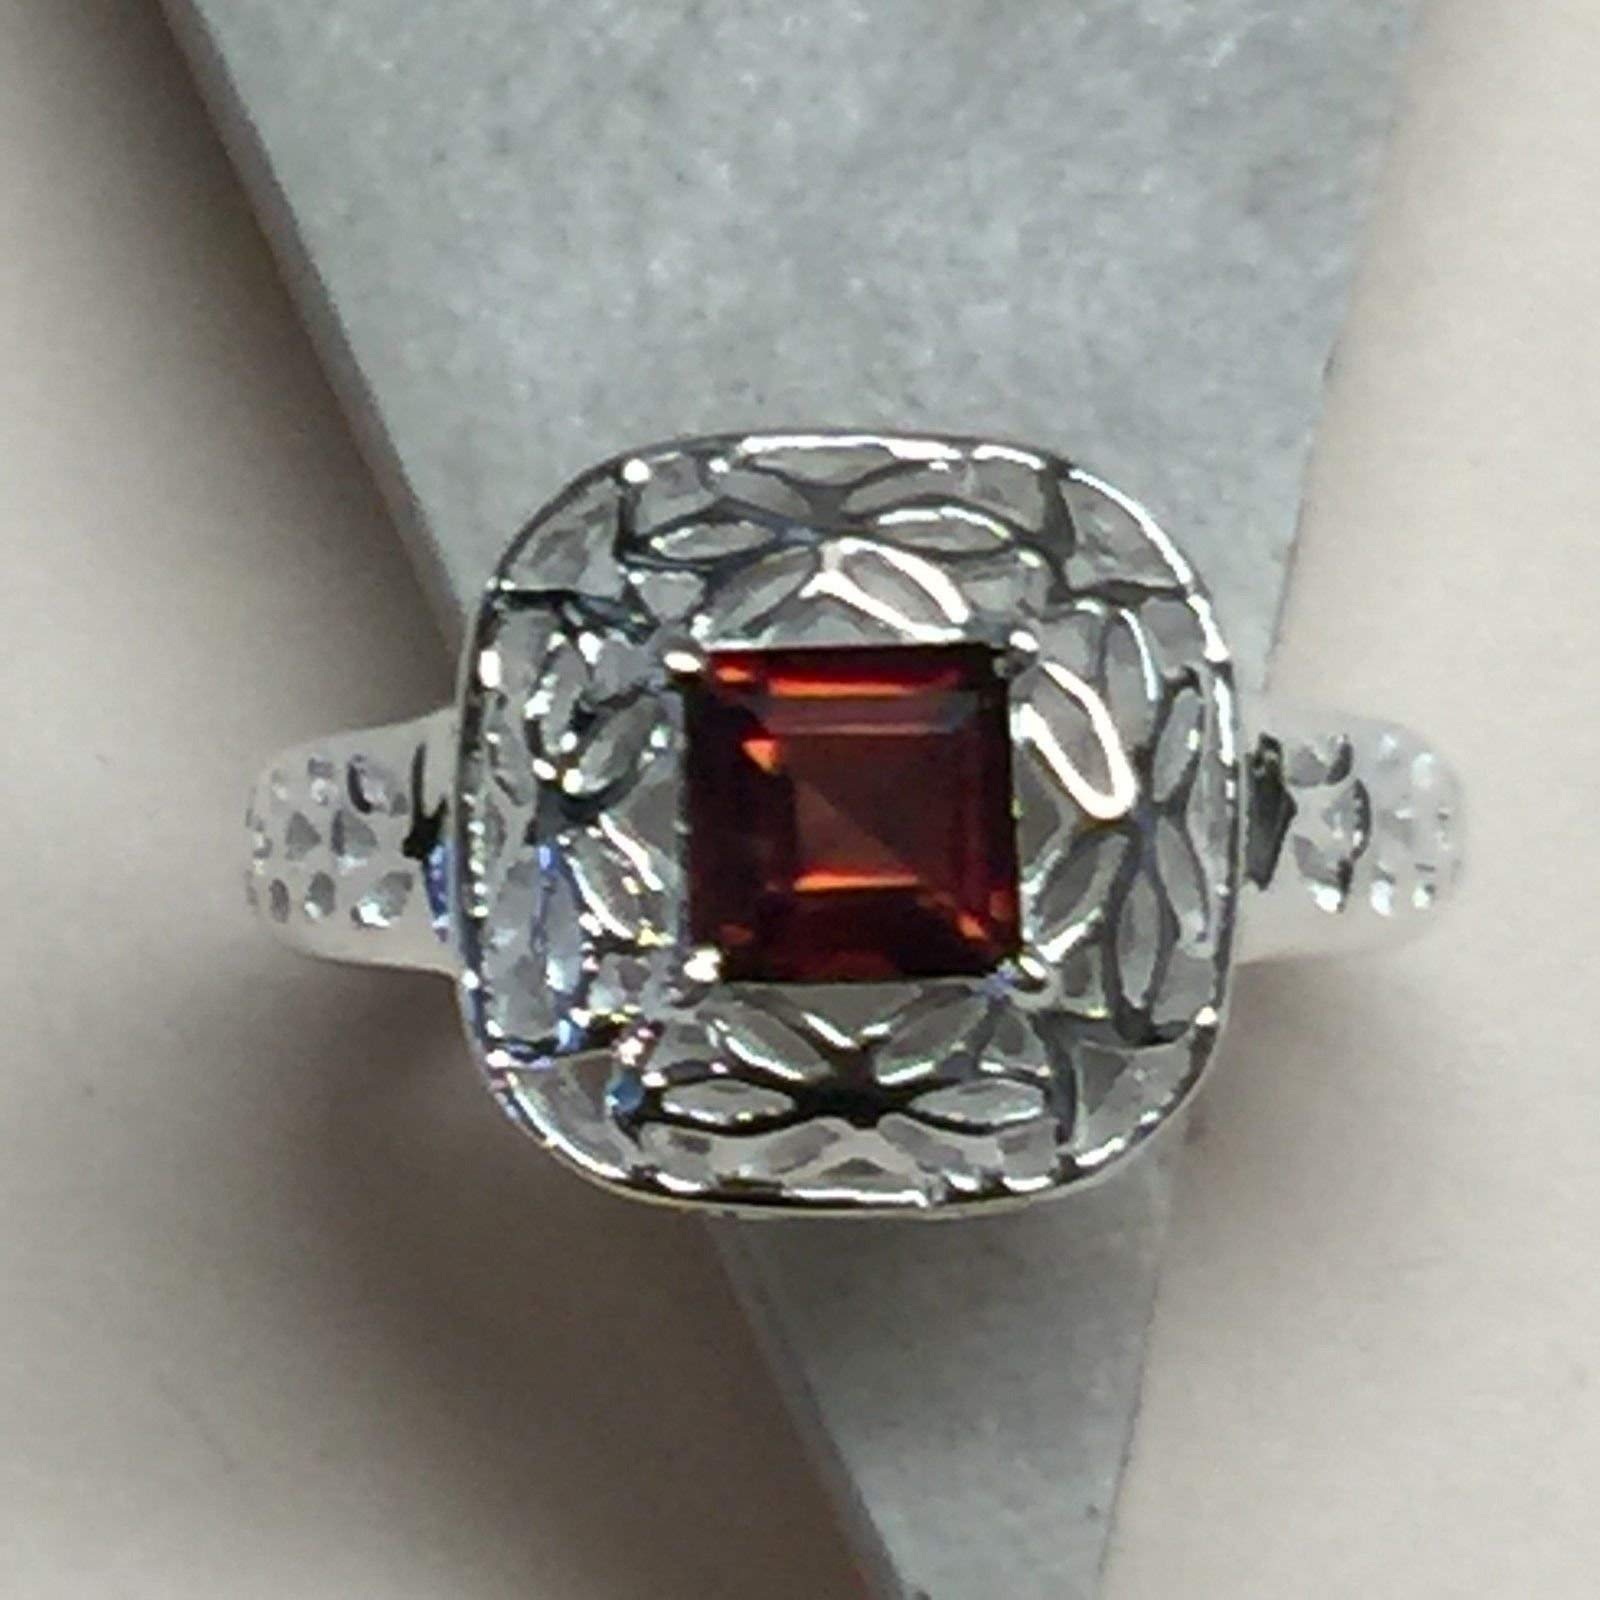 Natural 1ct Fire Garnet 925 Solid Sterling Silver Ring Size 6.75, 7.75 - Natural Rocks by Kala